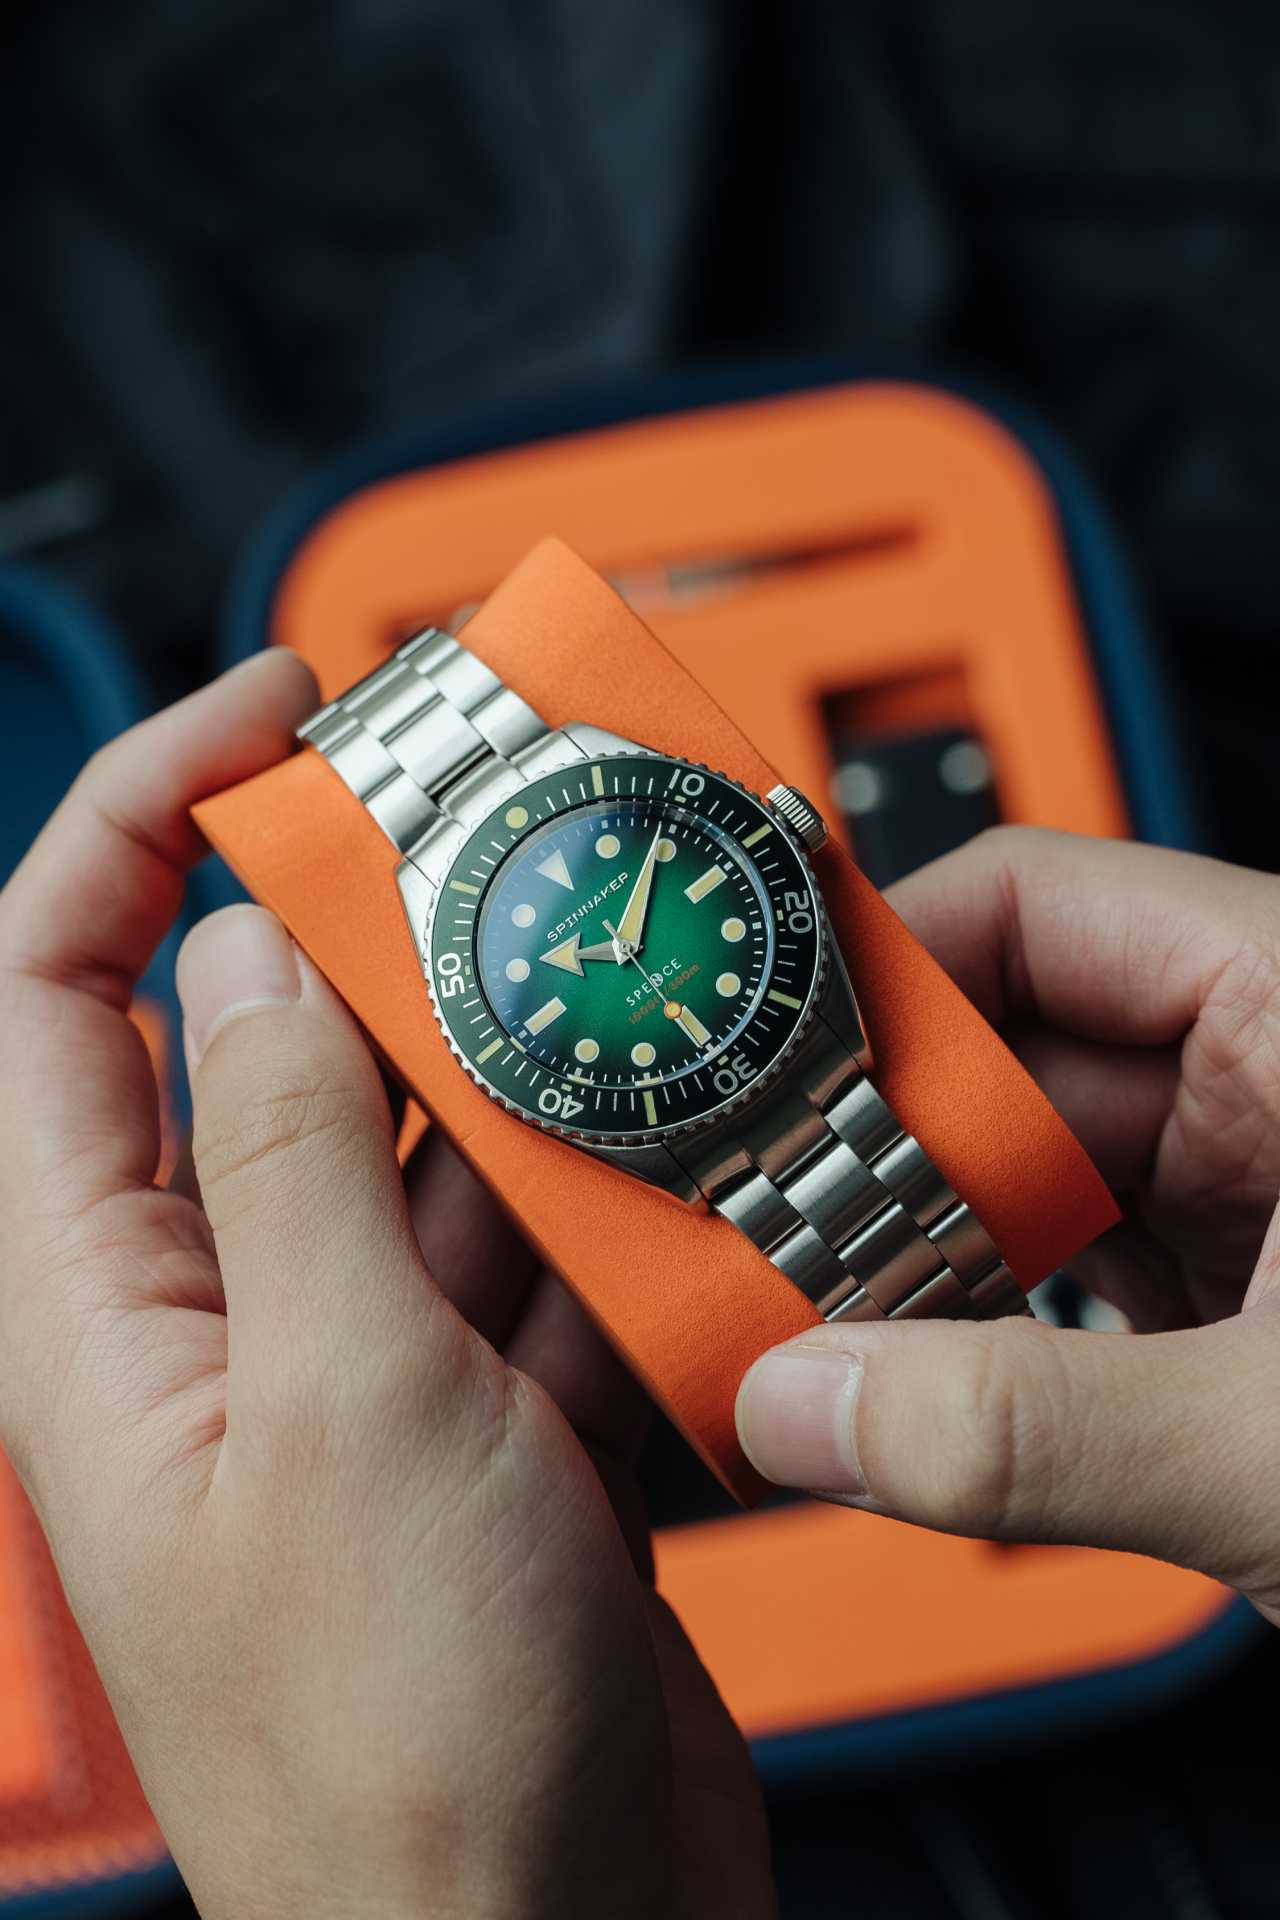 The Spinnaker Spence 300 Automatic with green bezel